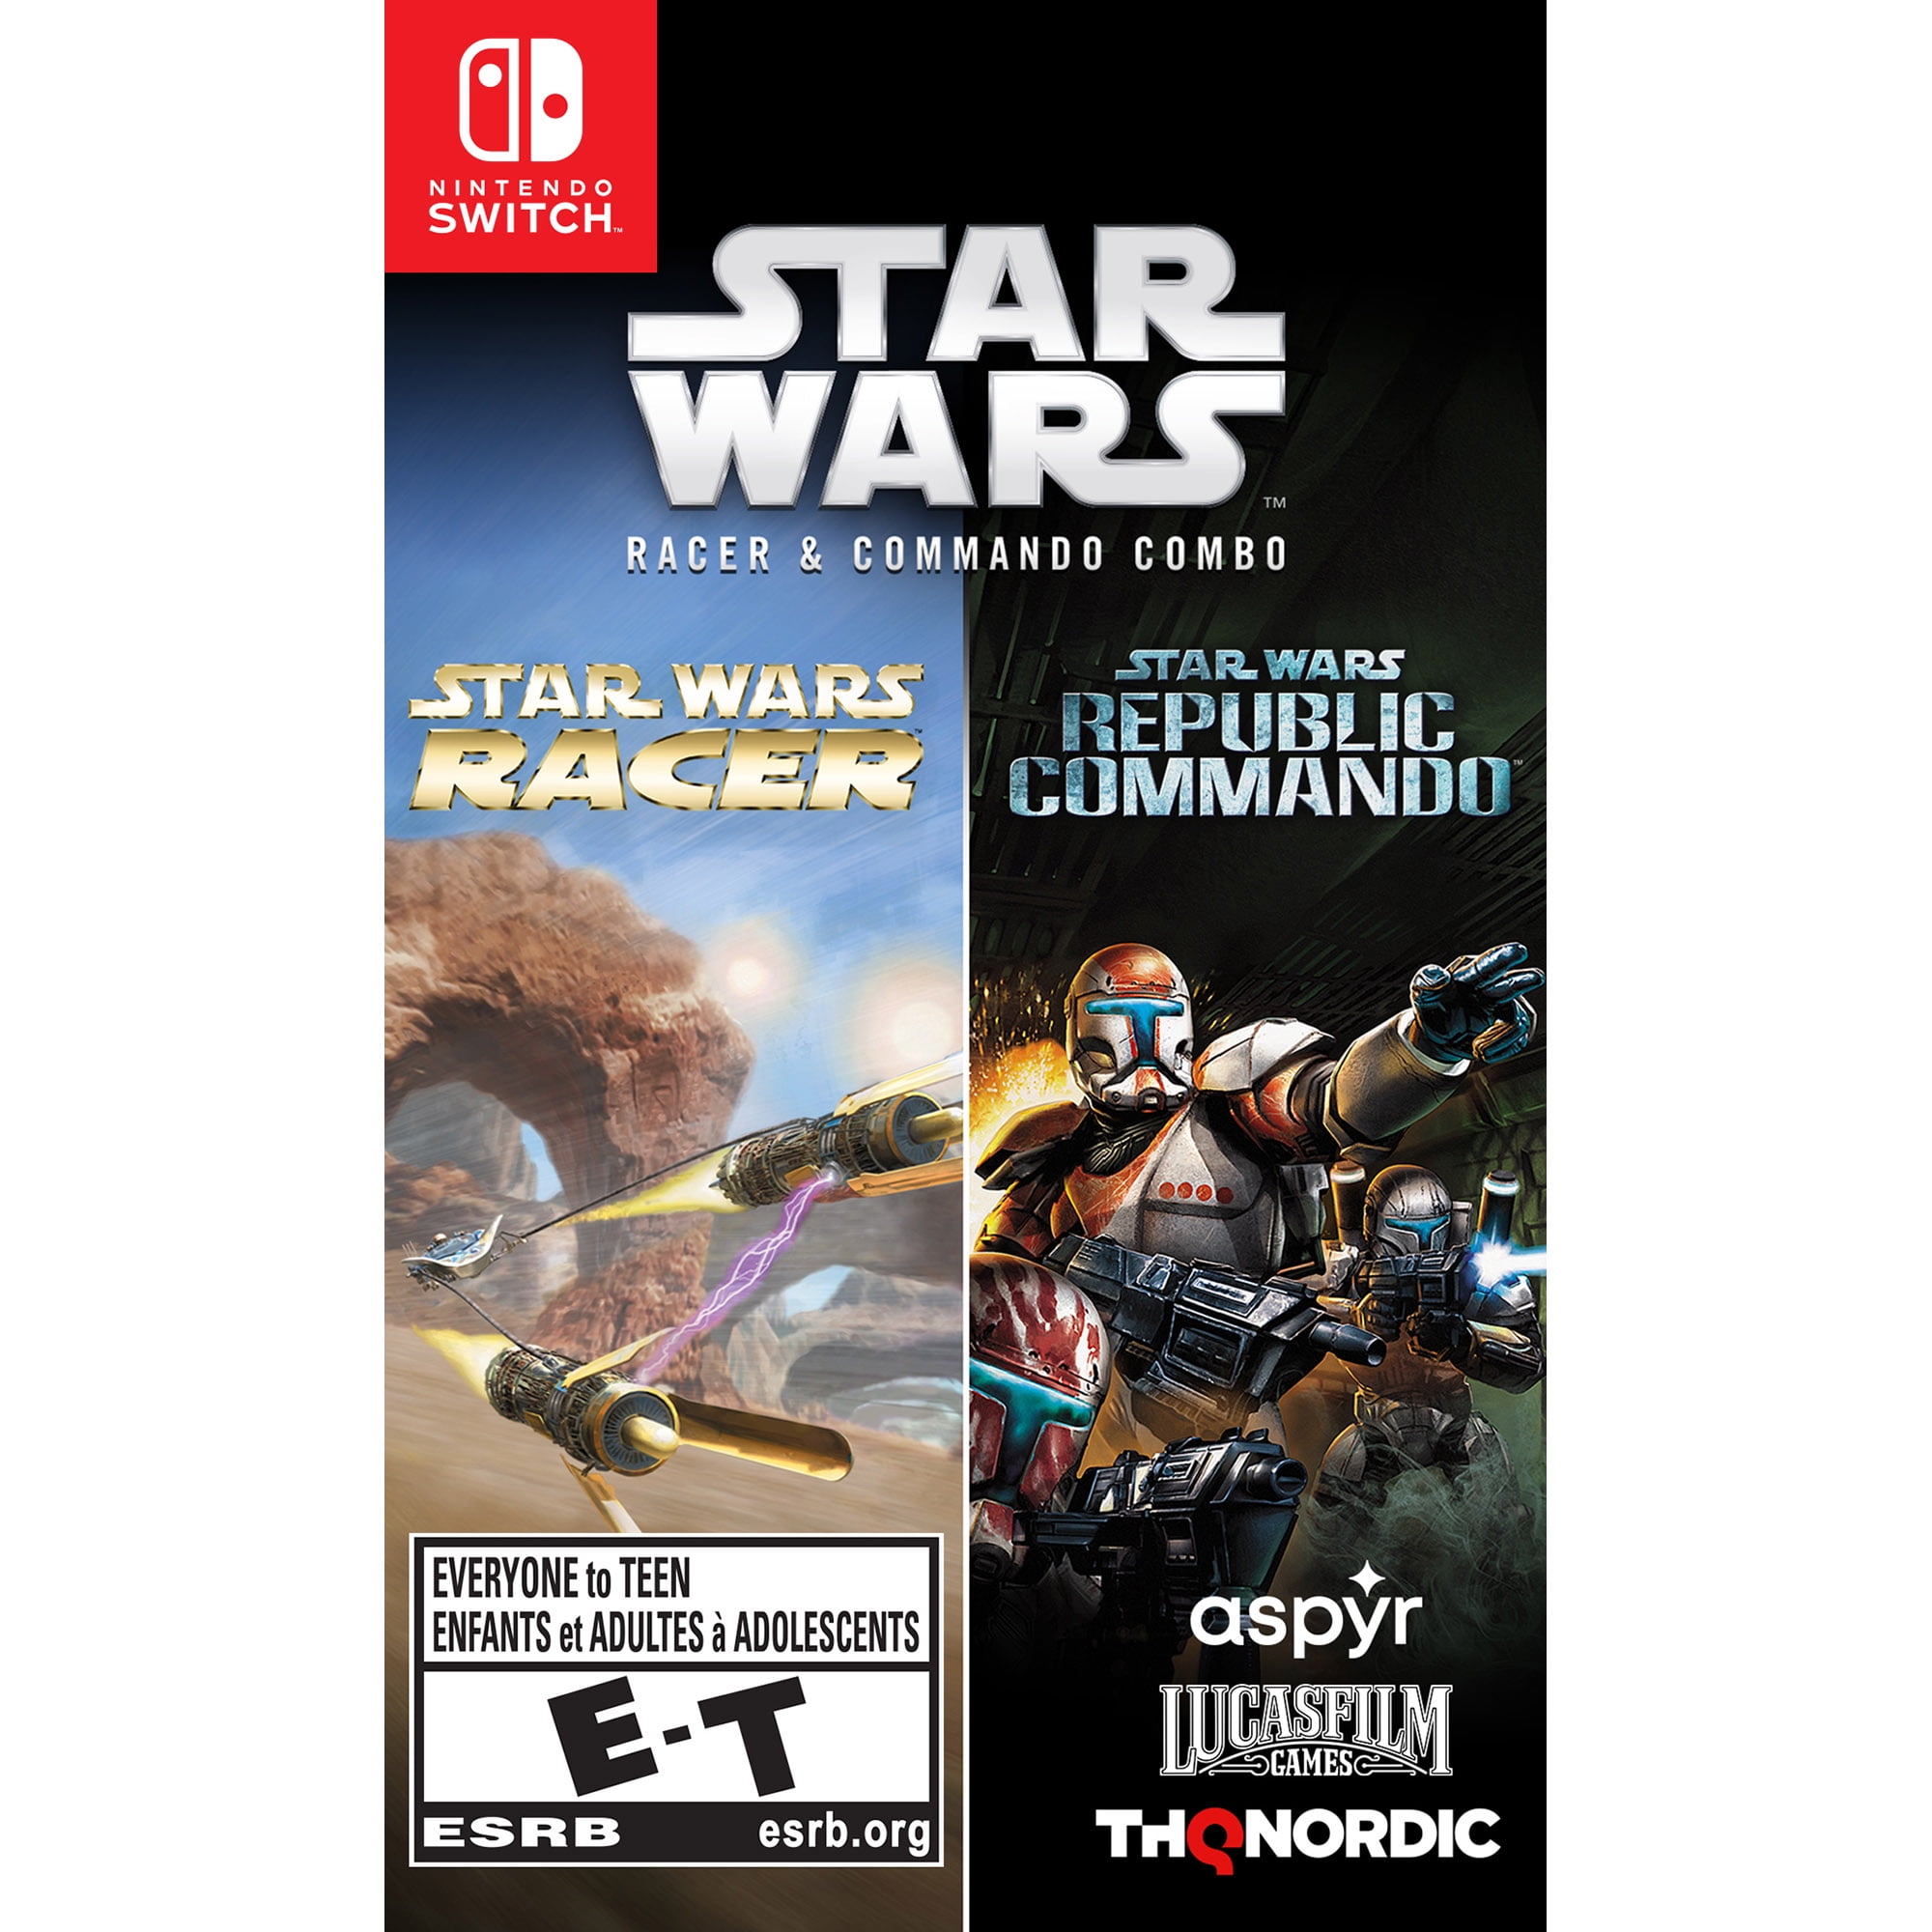 Star Wars: Racer and Commando Combo (Nintendo Switch, Physical) $17.97 + Free S&H w/ Walmart+ or $35+